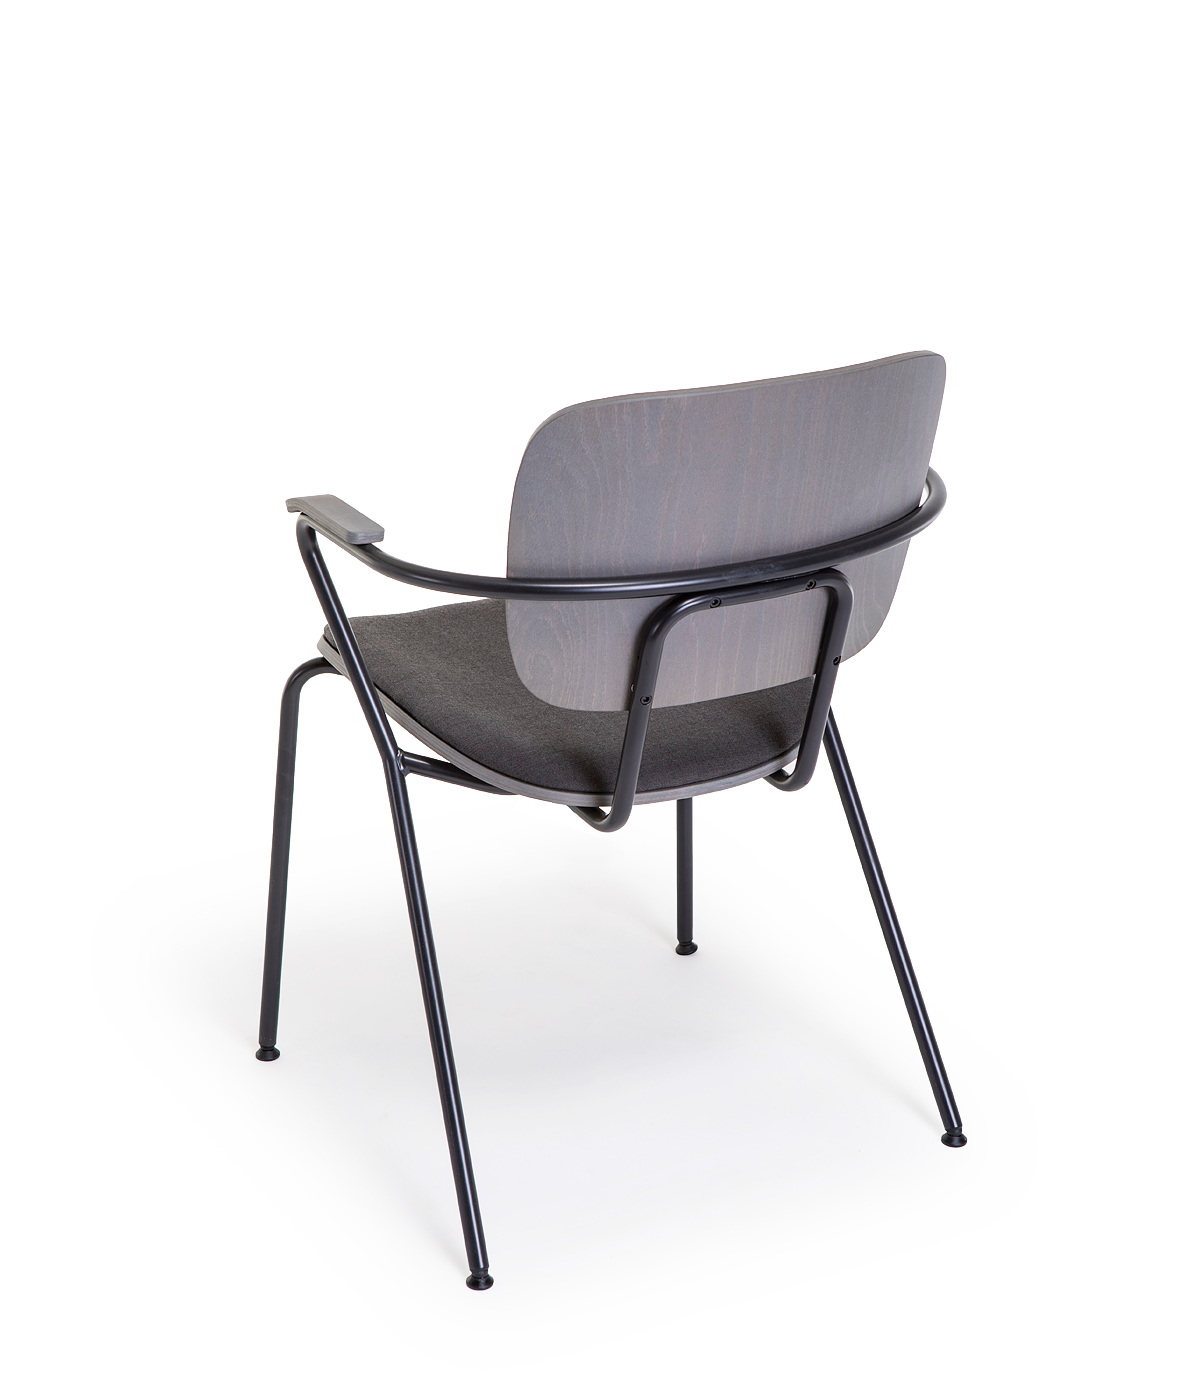 Vergés - ABC chair with metallic armrests and legs